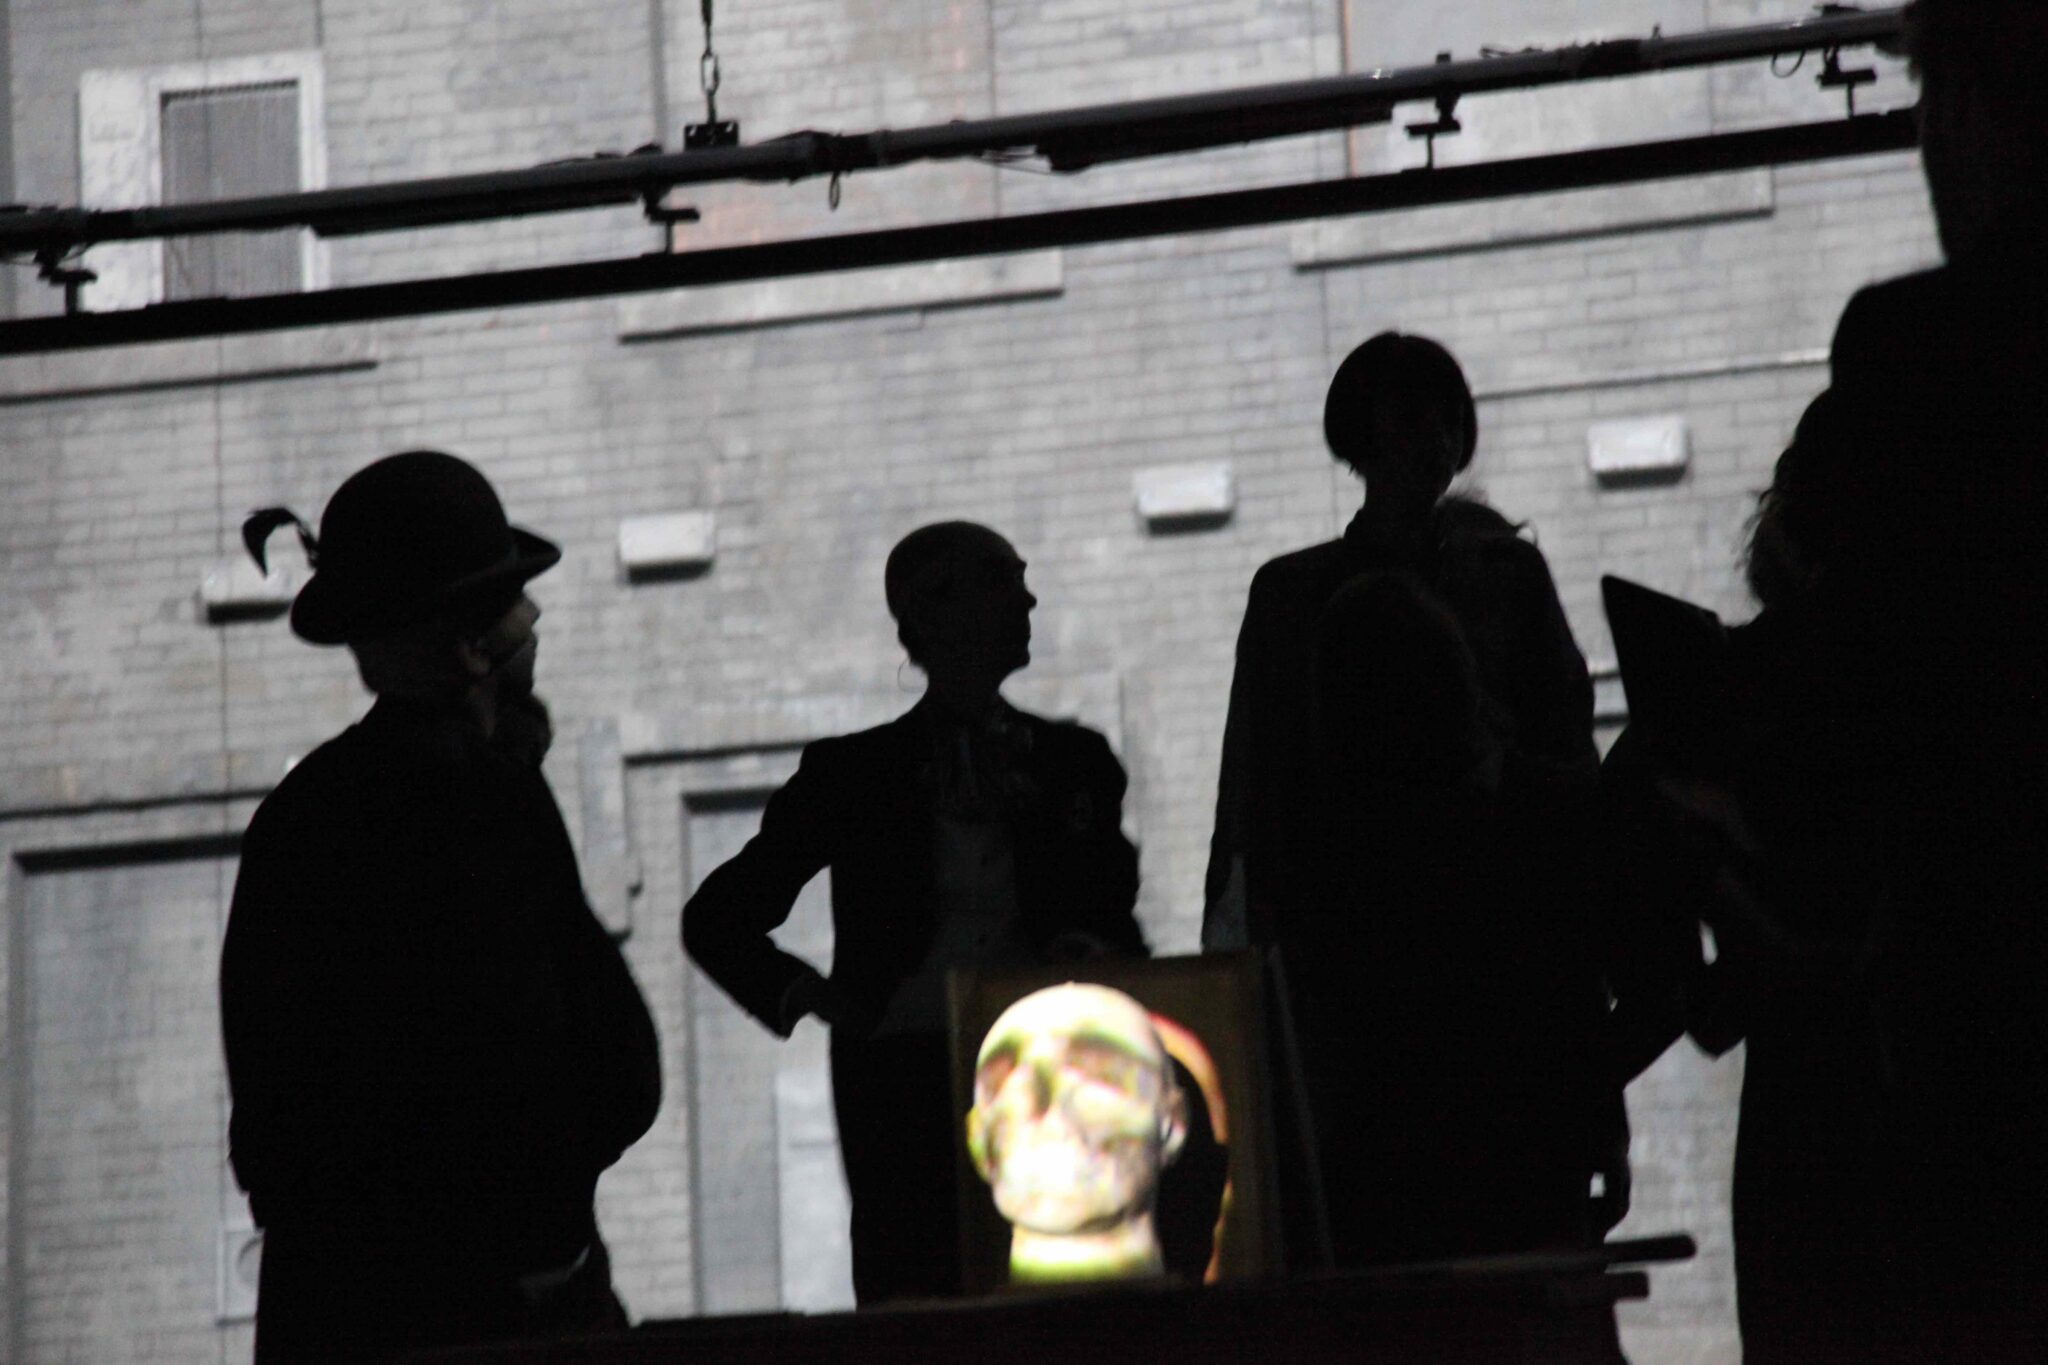 Four shadowy figures in the background and a skull is seen in the foreground